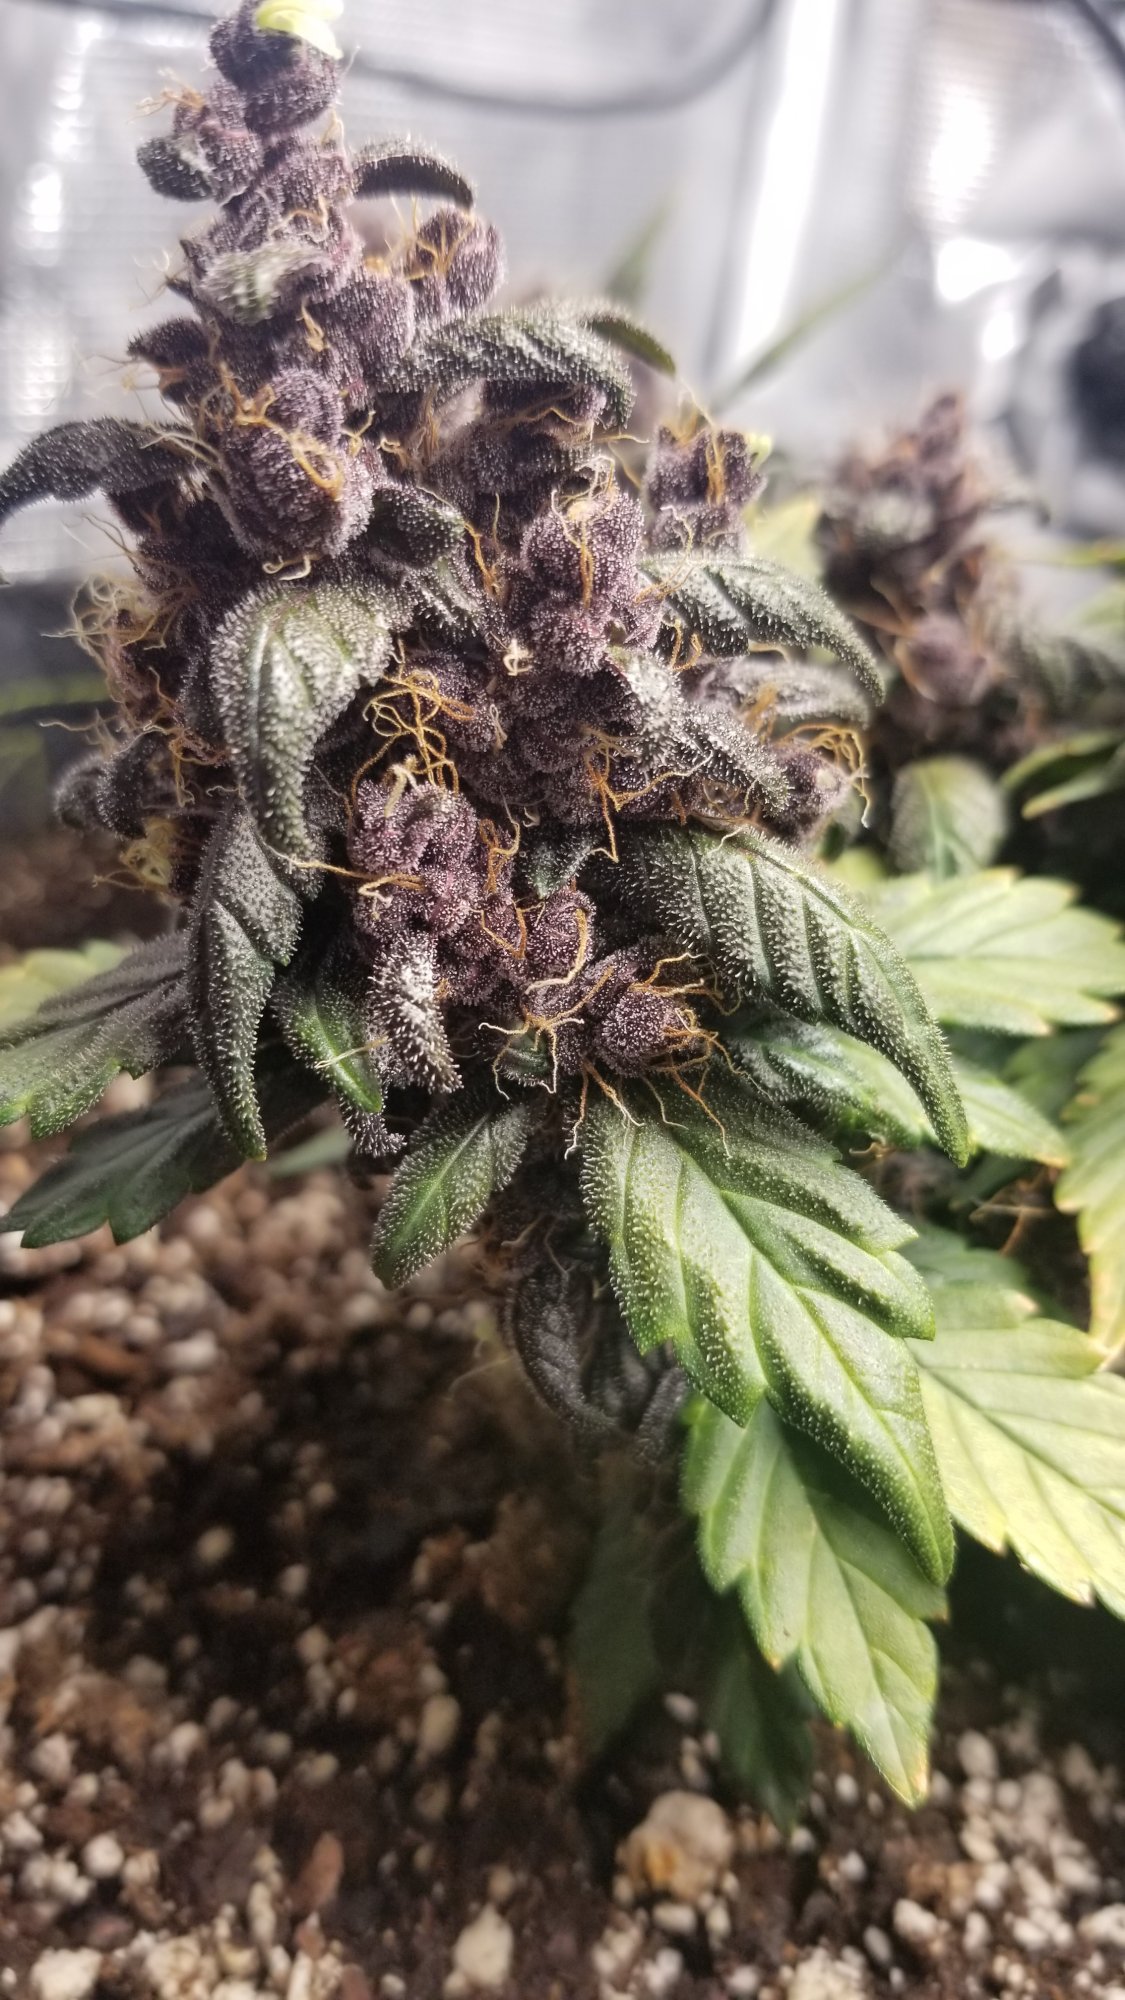 Few pics from my current grow 12